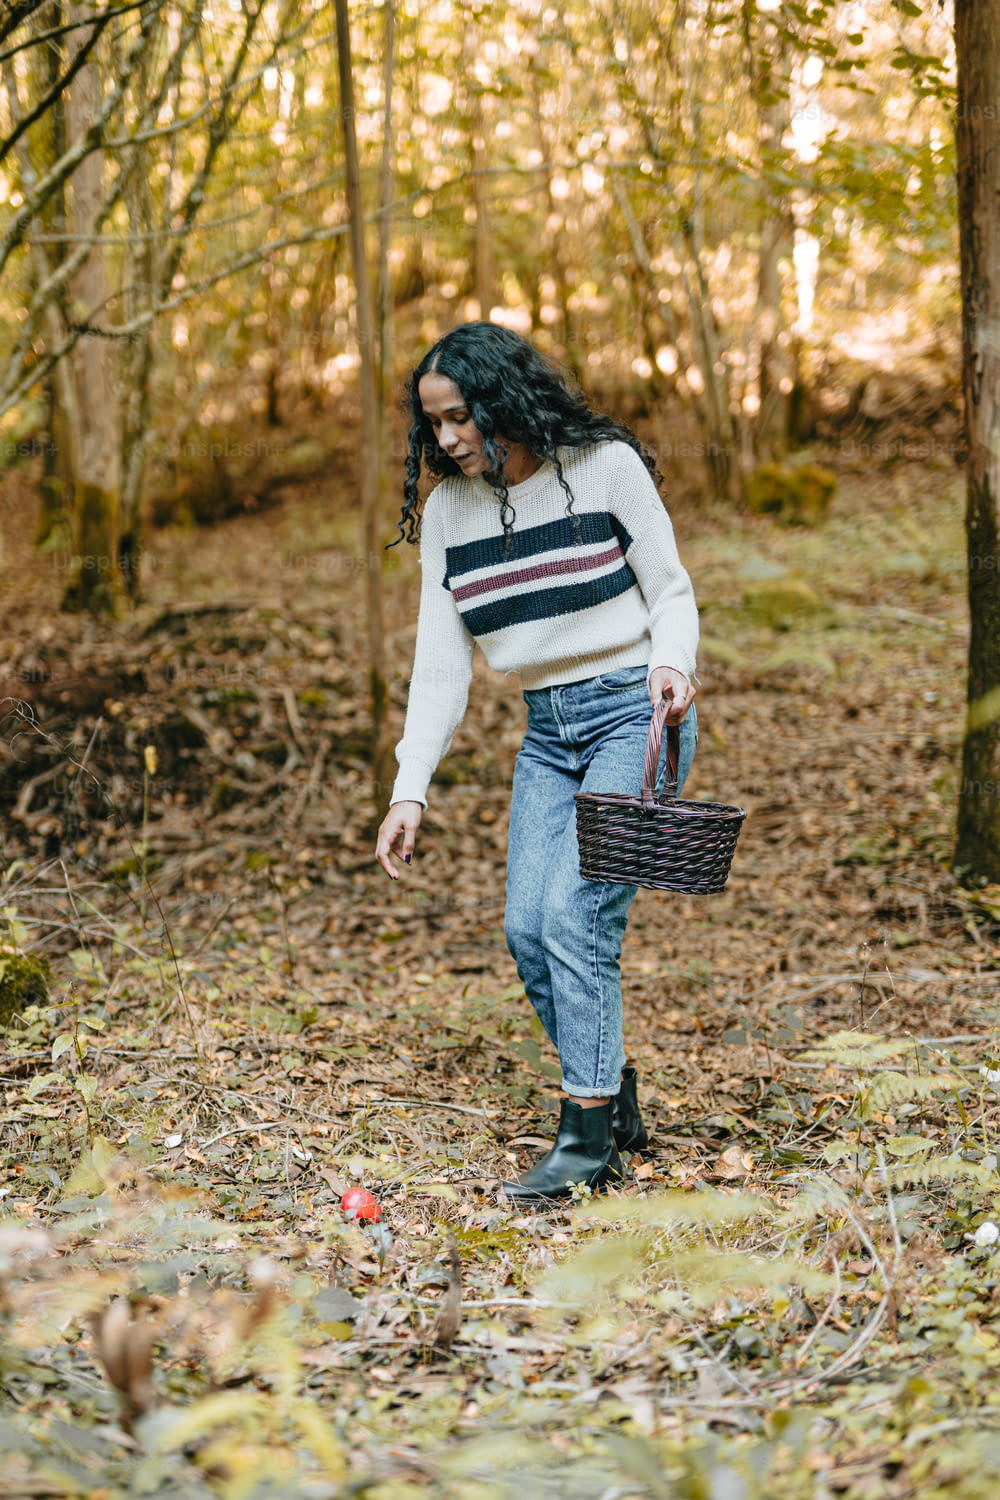 a woman walking through a forest carrying a basket